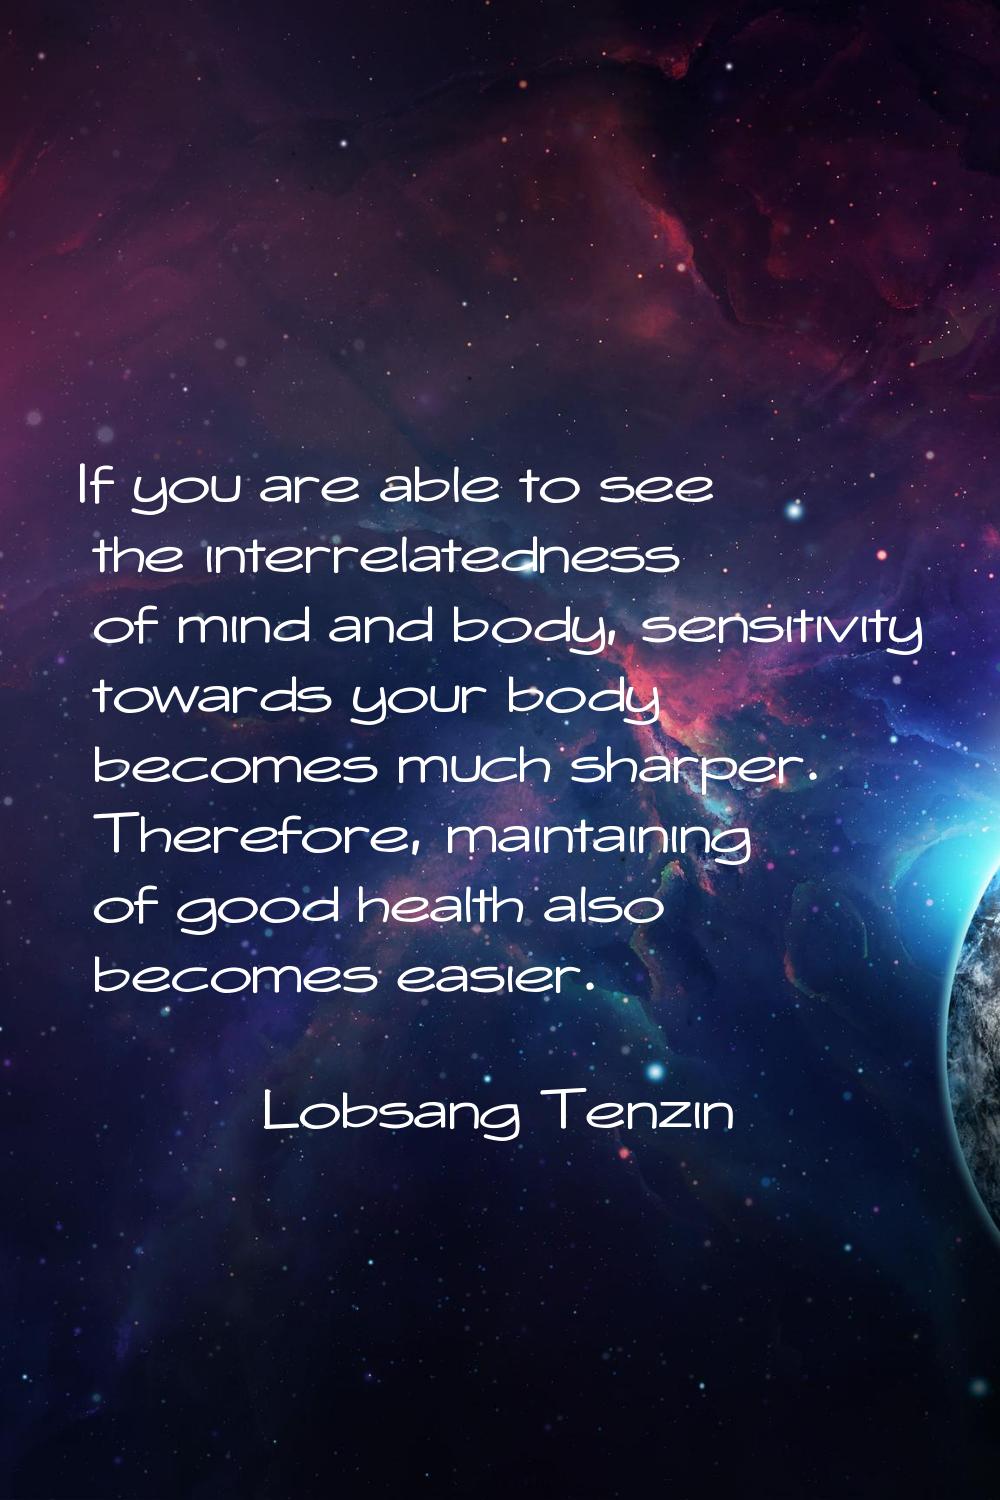 If you are able to see the interrelatedness of mind and body, sensitivity towards your body becomes